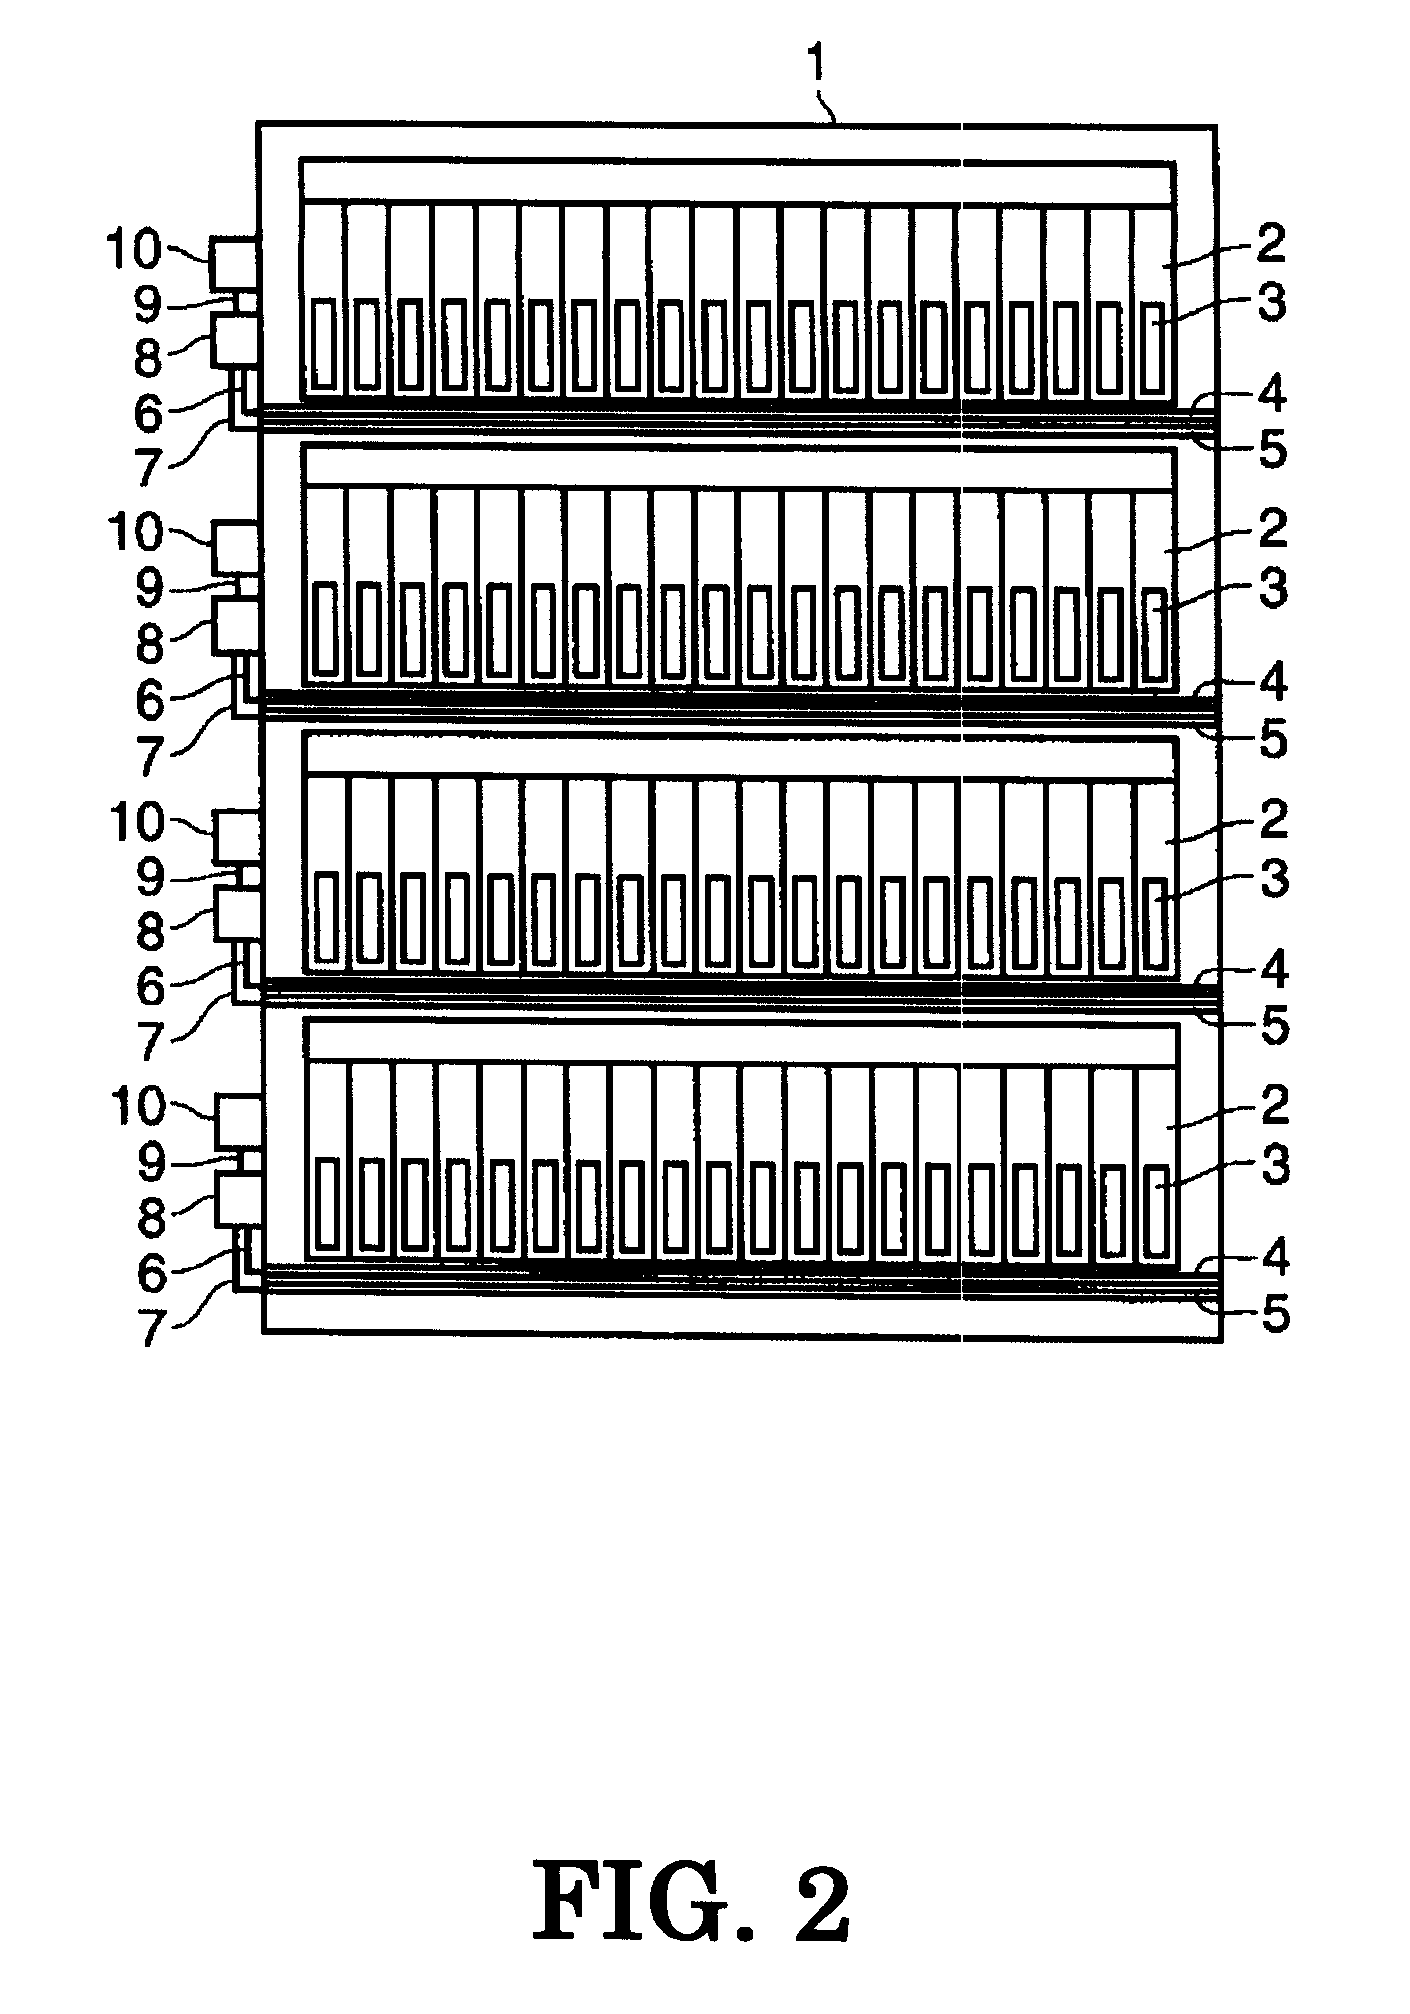 Antenna device used in radio-communications within short communication range and article container